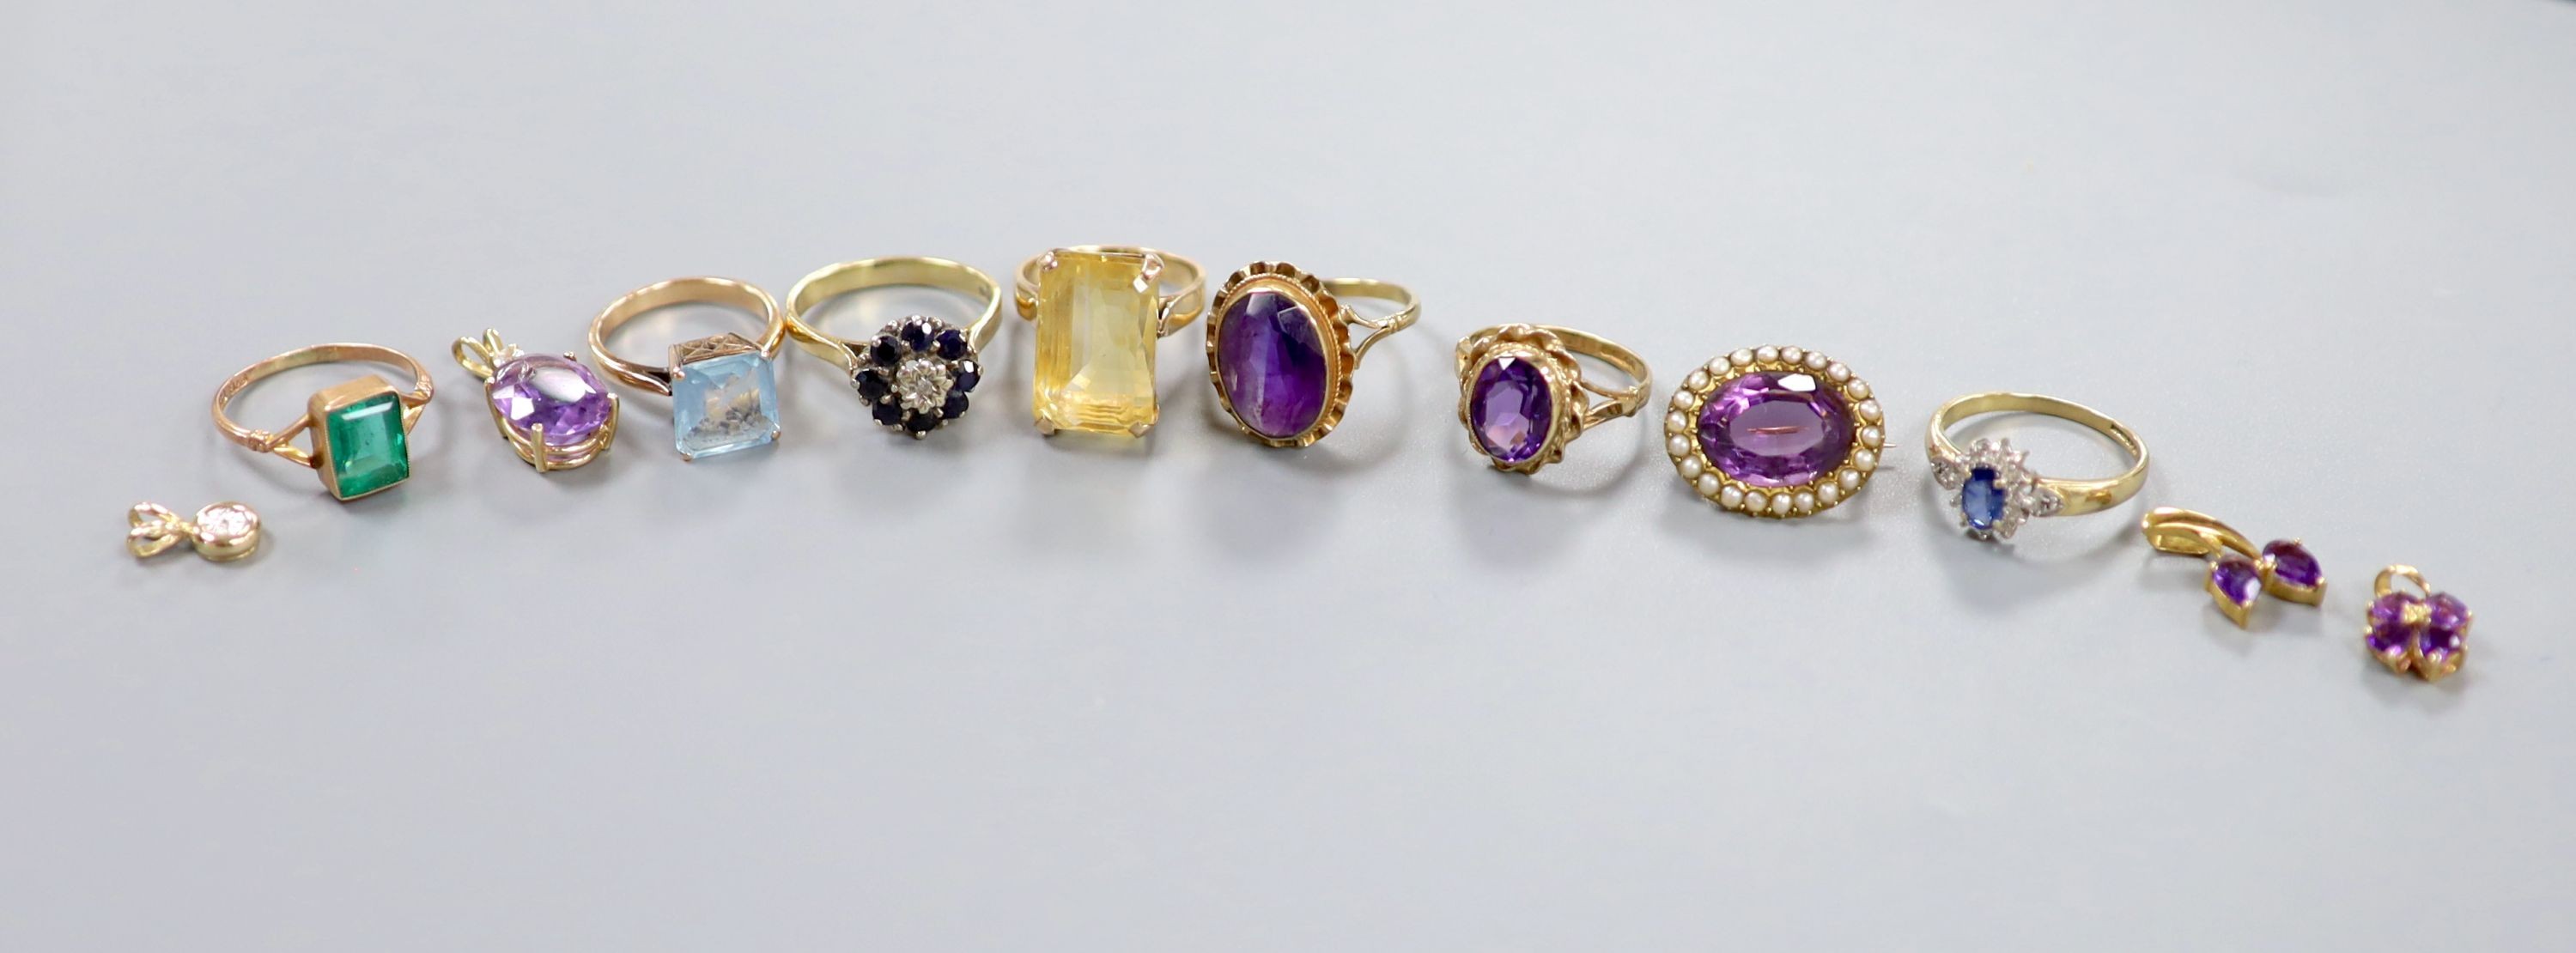 Mixed jewellery including five 9ct and gem set dress rings and a 9ct small pendant, gross 14.9 grams, an 18k and citrine ring and two 18k and amethyst set small pendants, gross 10 grams, a 15ct and amethyst brooch, gross